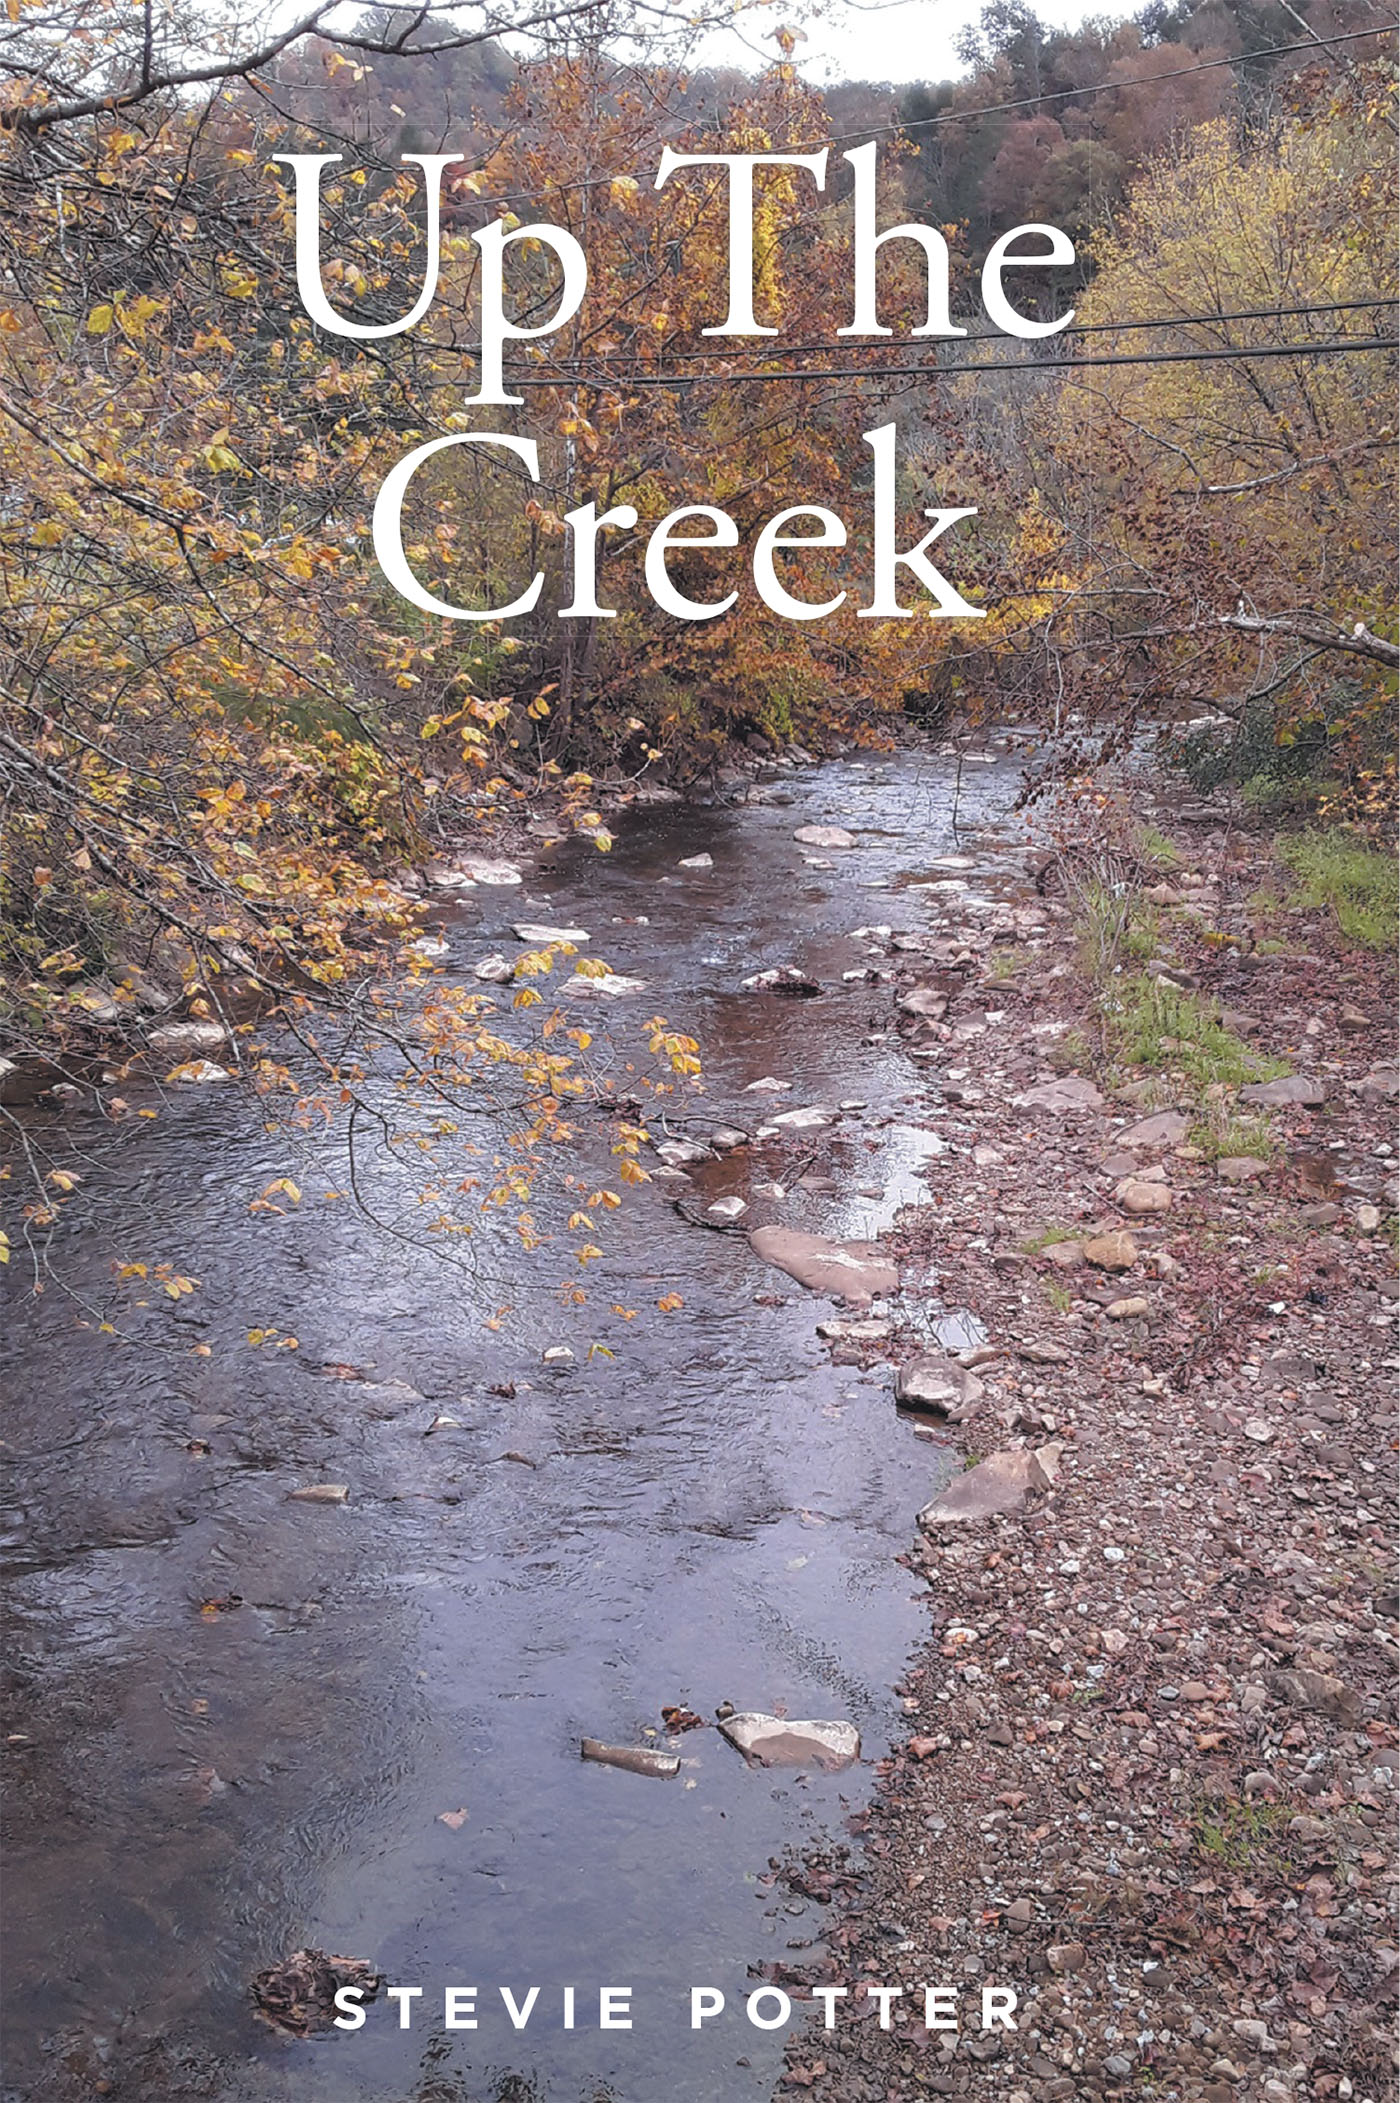 Stevie Potter’s Newly Released "Up The Creek" is an Inspiring Memoir That Examines the Author’s Formative Years Filled with Challenges and Blessings